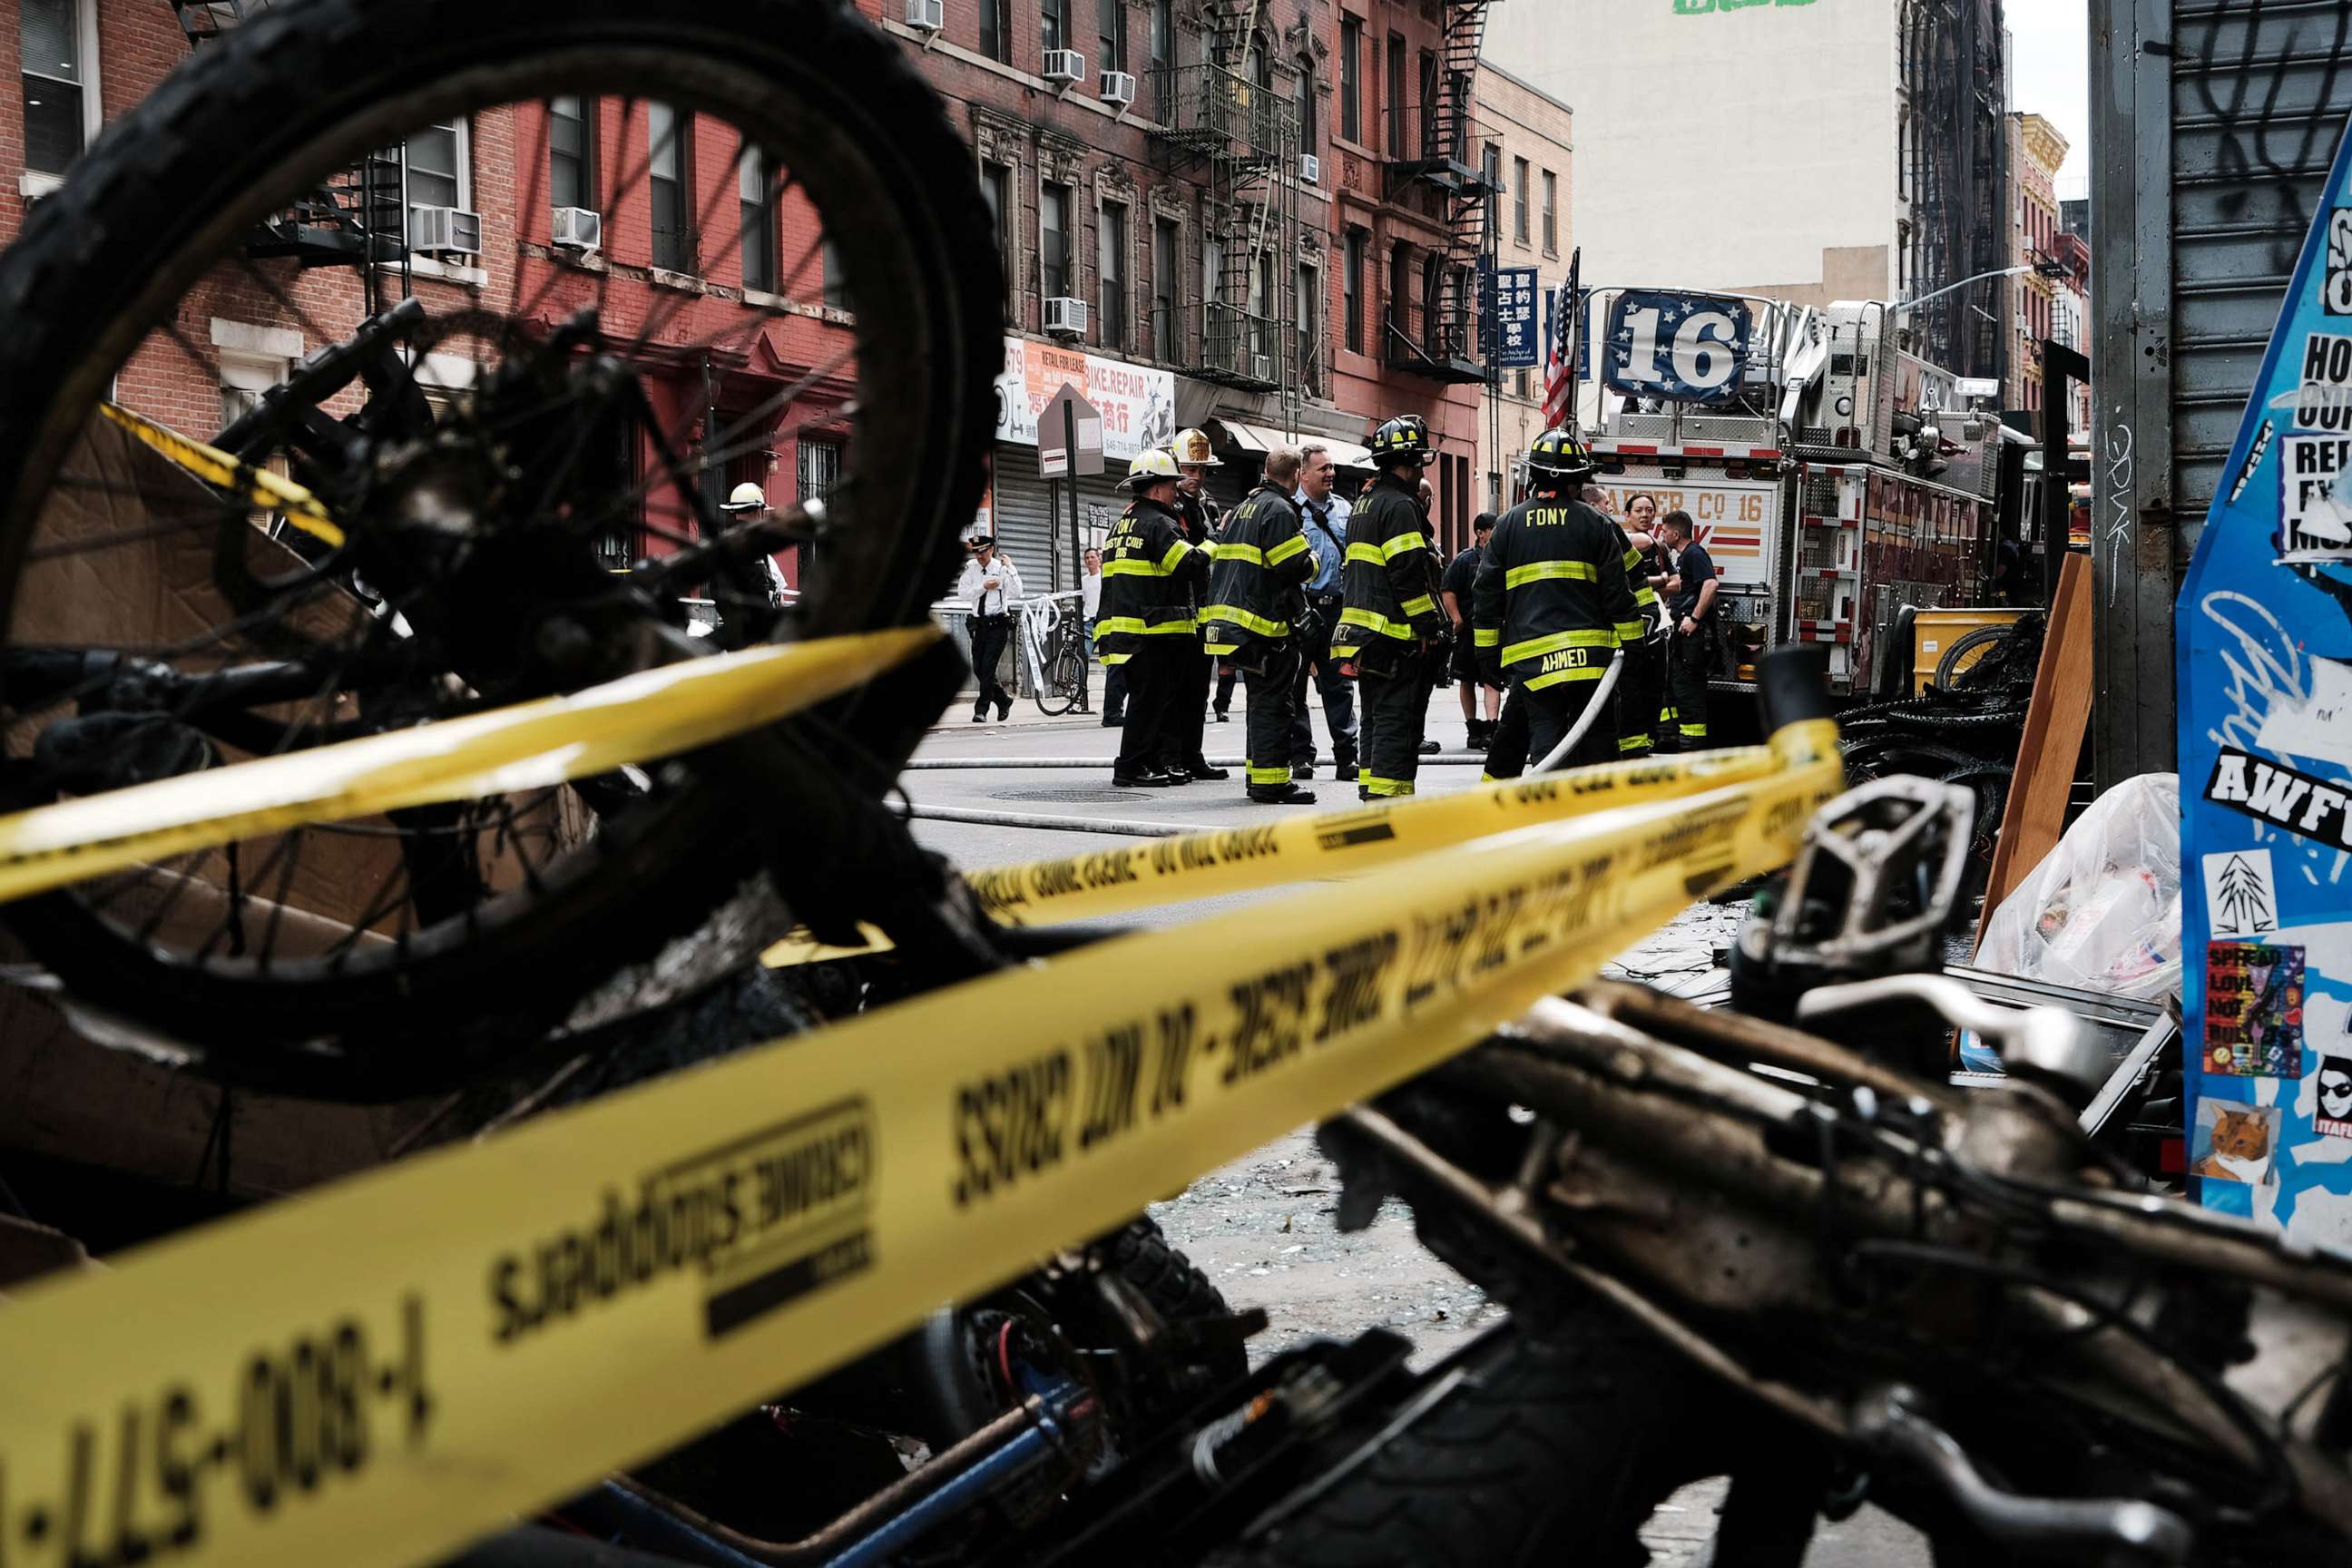 PHOTO: Charred remains of e-bikes and scooters sit outside of a building in Chinatown after four people were killed by a fire in an e-bike repair shop overnight, June 20, 2023 in New York City.